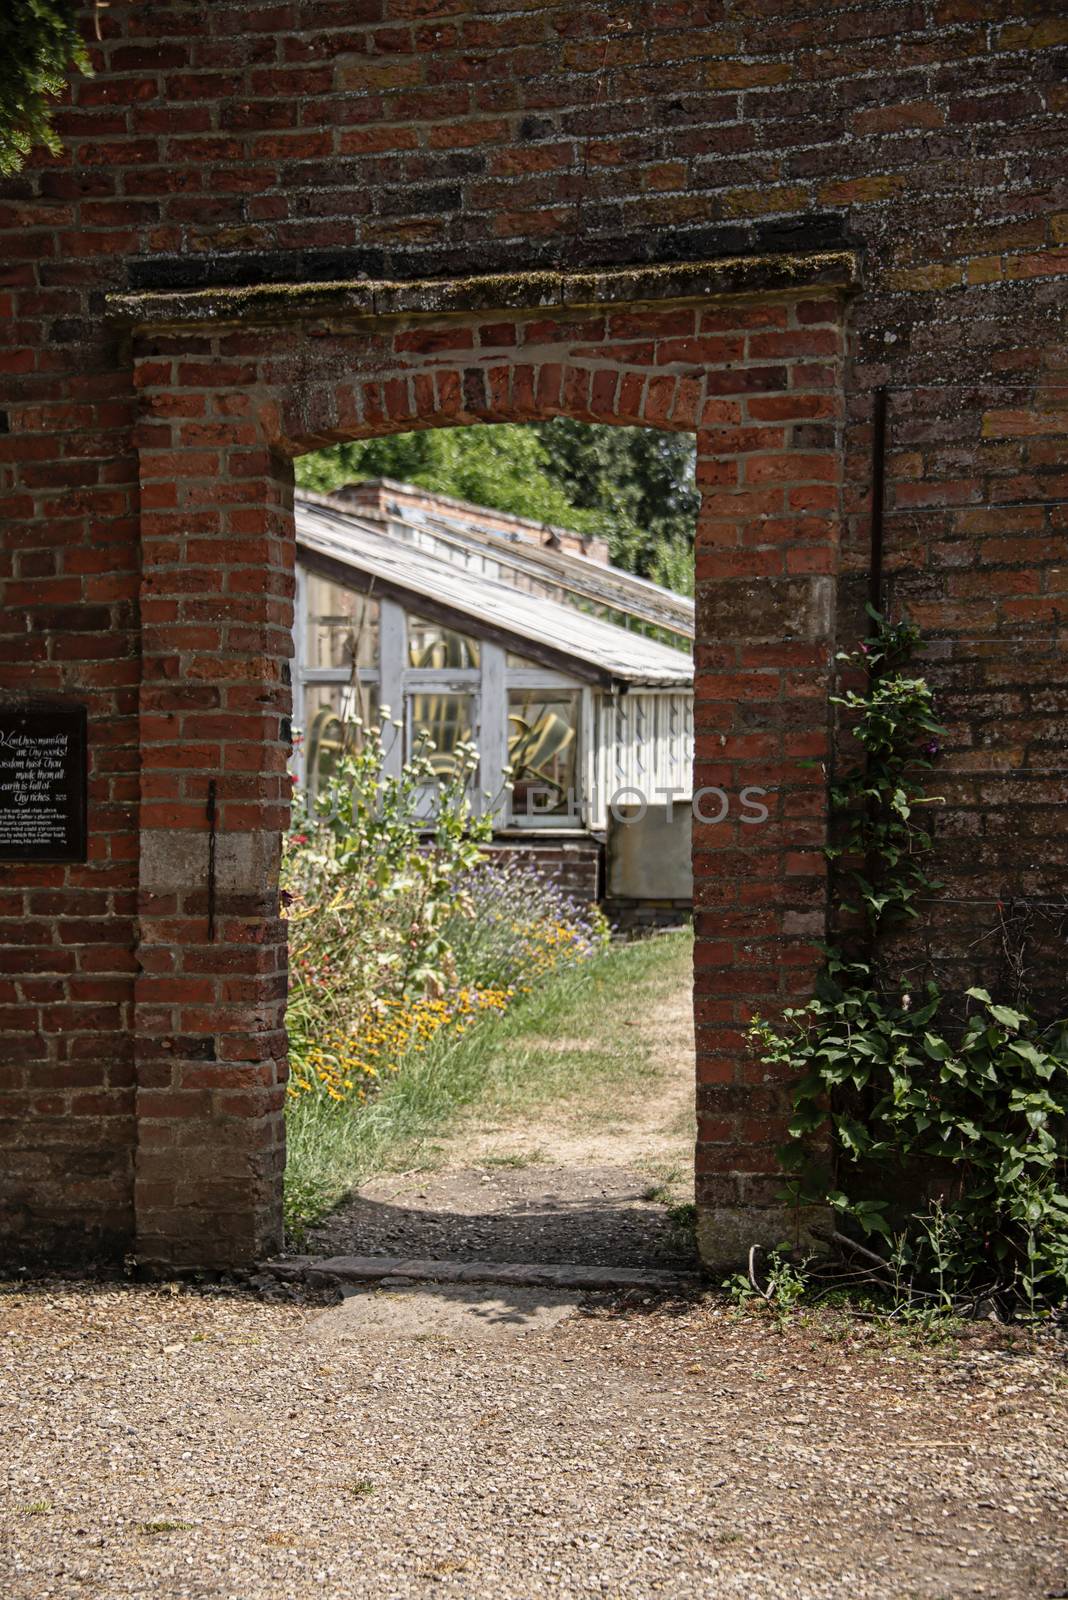 UK, Launde Abbey, Leicestershire - July 2018: Brick opening frames the entry to a walled